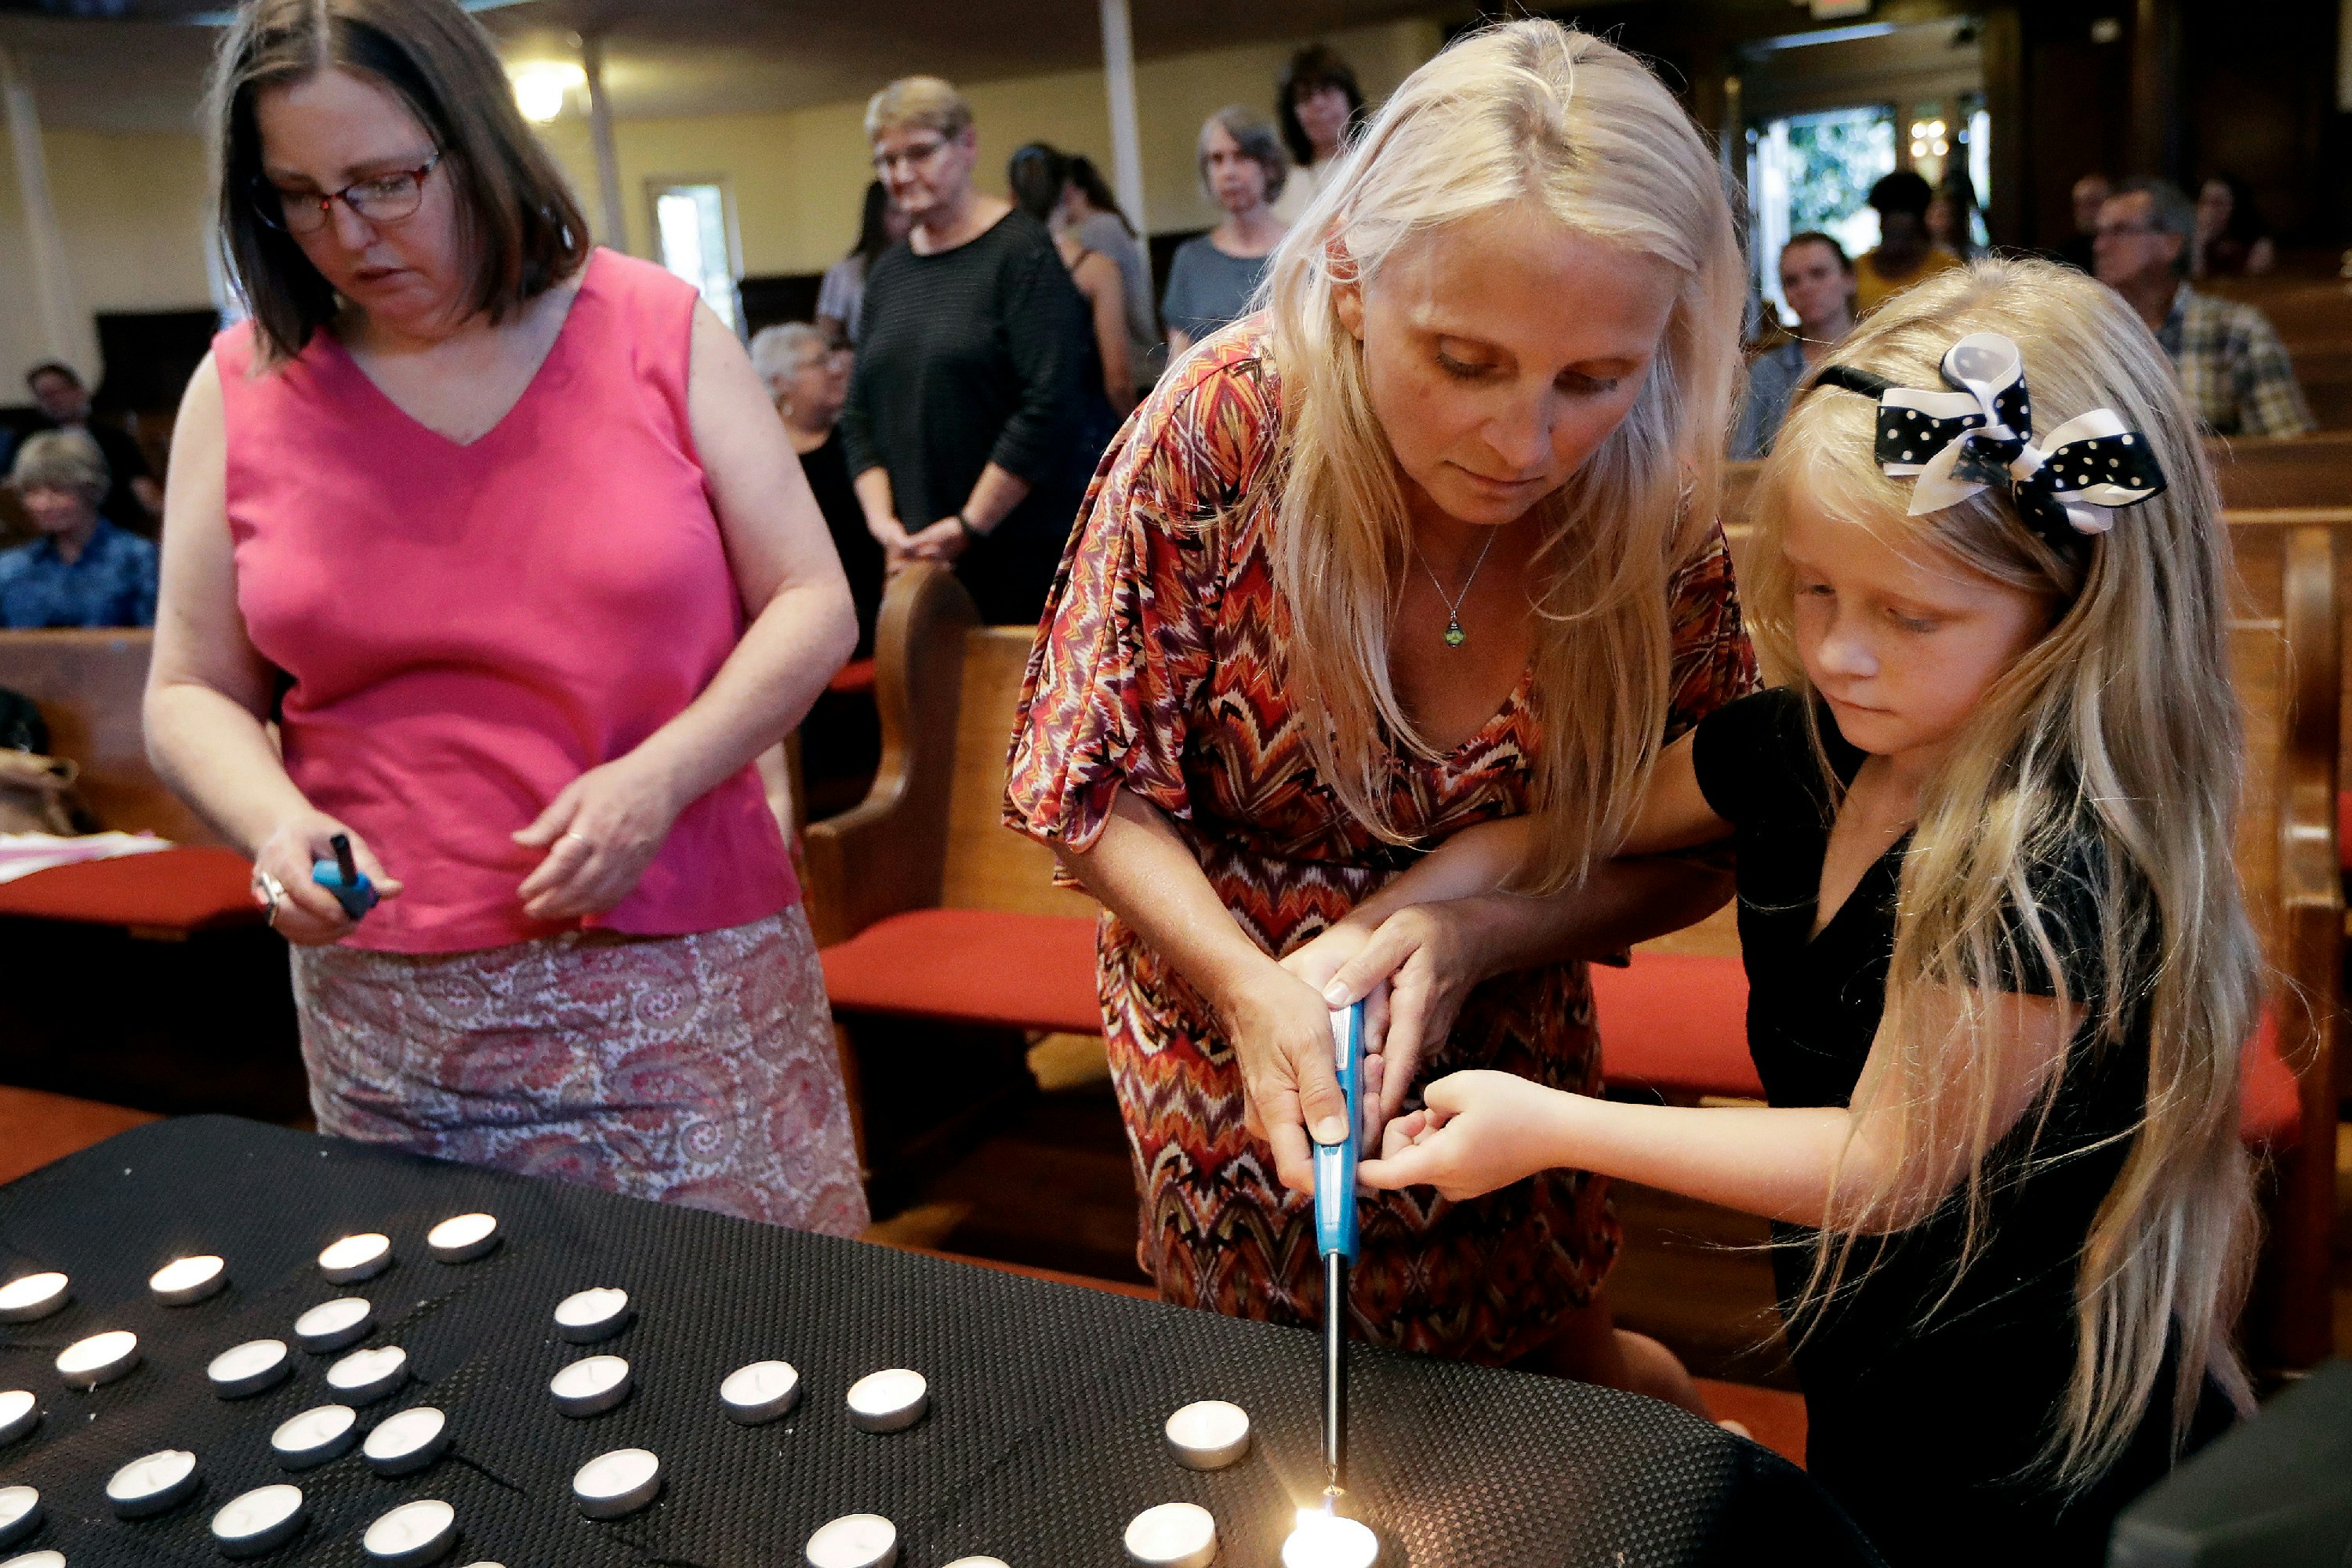 Candles are lit during a vigil at Fisk University to protest the execution of Billy Ray Irick Thursday, Aug. 9, 2018, in Nashville, Tenn. Tennessee carried out the execution of Irick, condemned for the 1985 rape and murder of a 7-year-old girl, marking the first time the state has applied the death penalty since 2009. (AP Photo/Mark Humphrey)